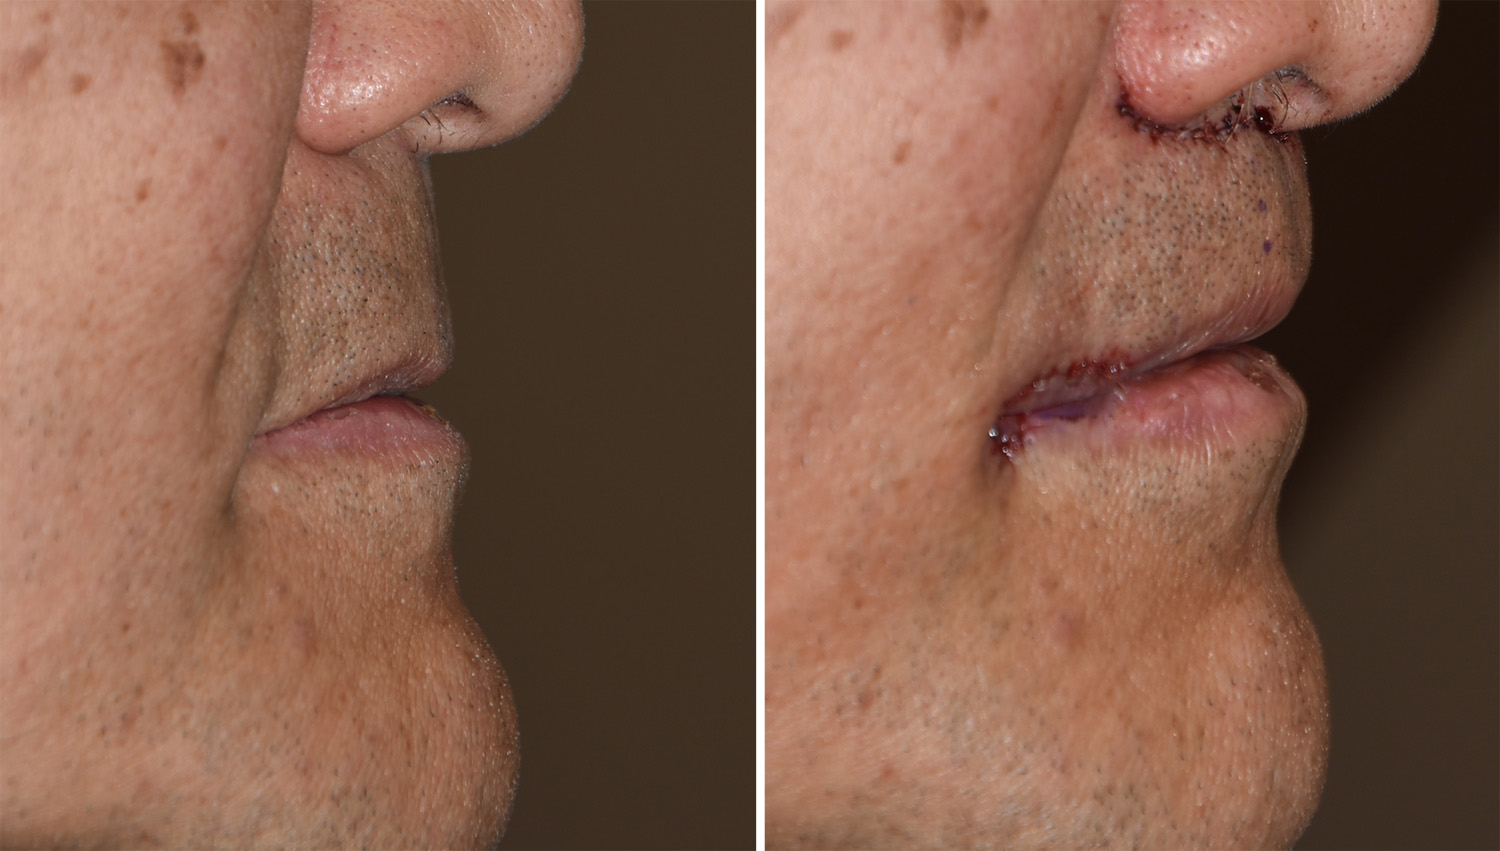 Subnasal-Lip-Lift-and-Corner-of-the-Mouth-Lifts-immediate-result-Dr-Barry-Eppley-Indianapolis.jpg